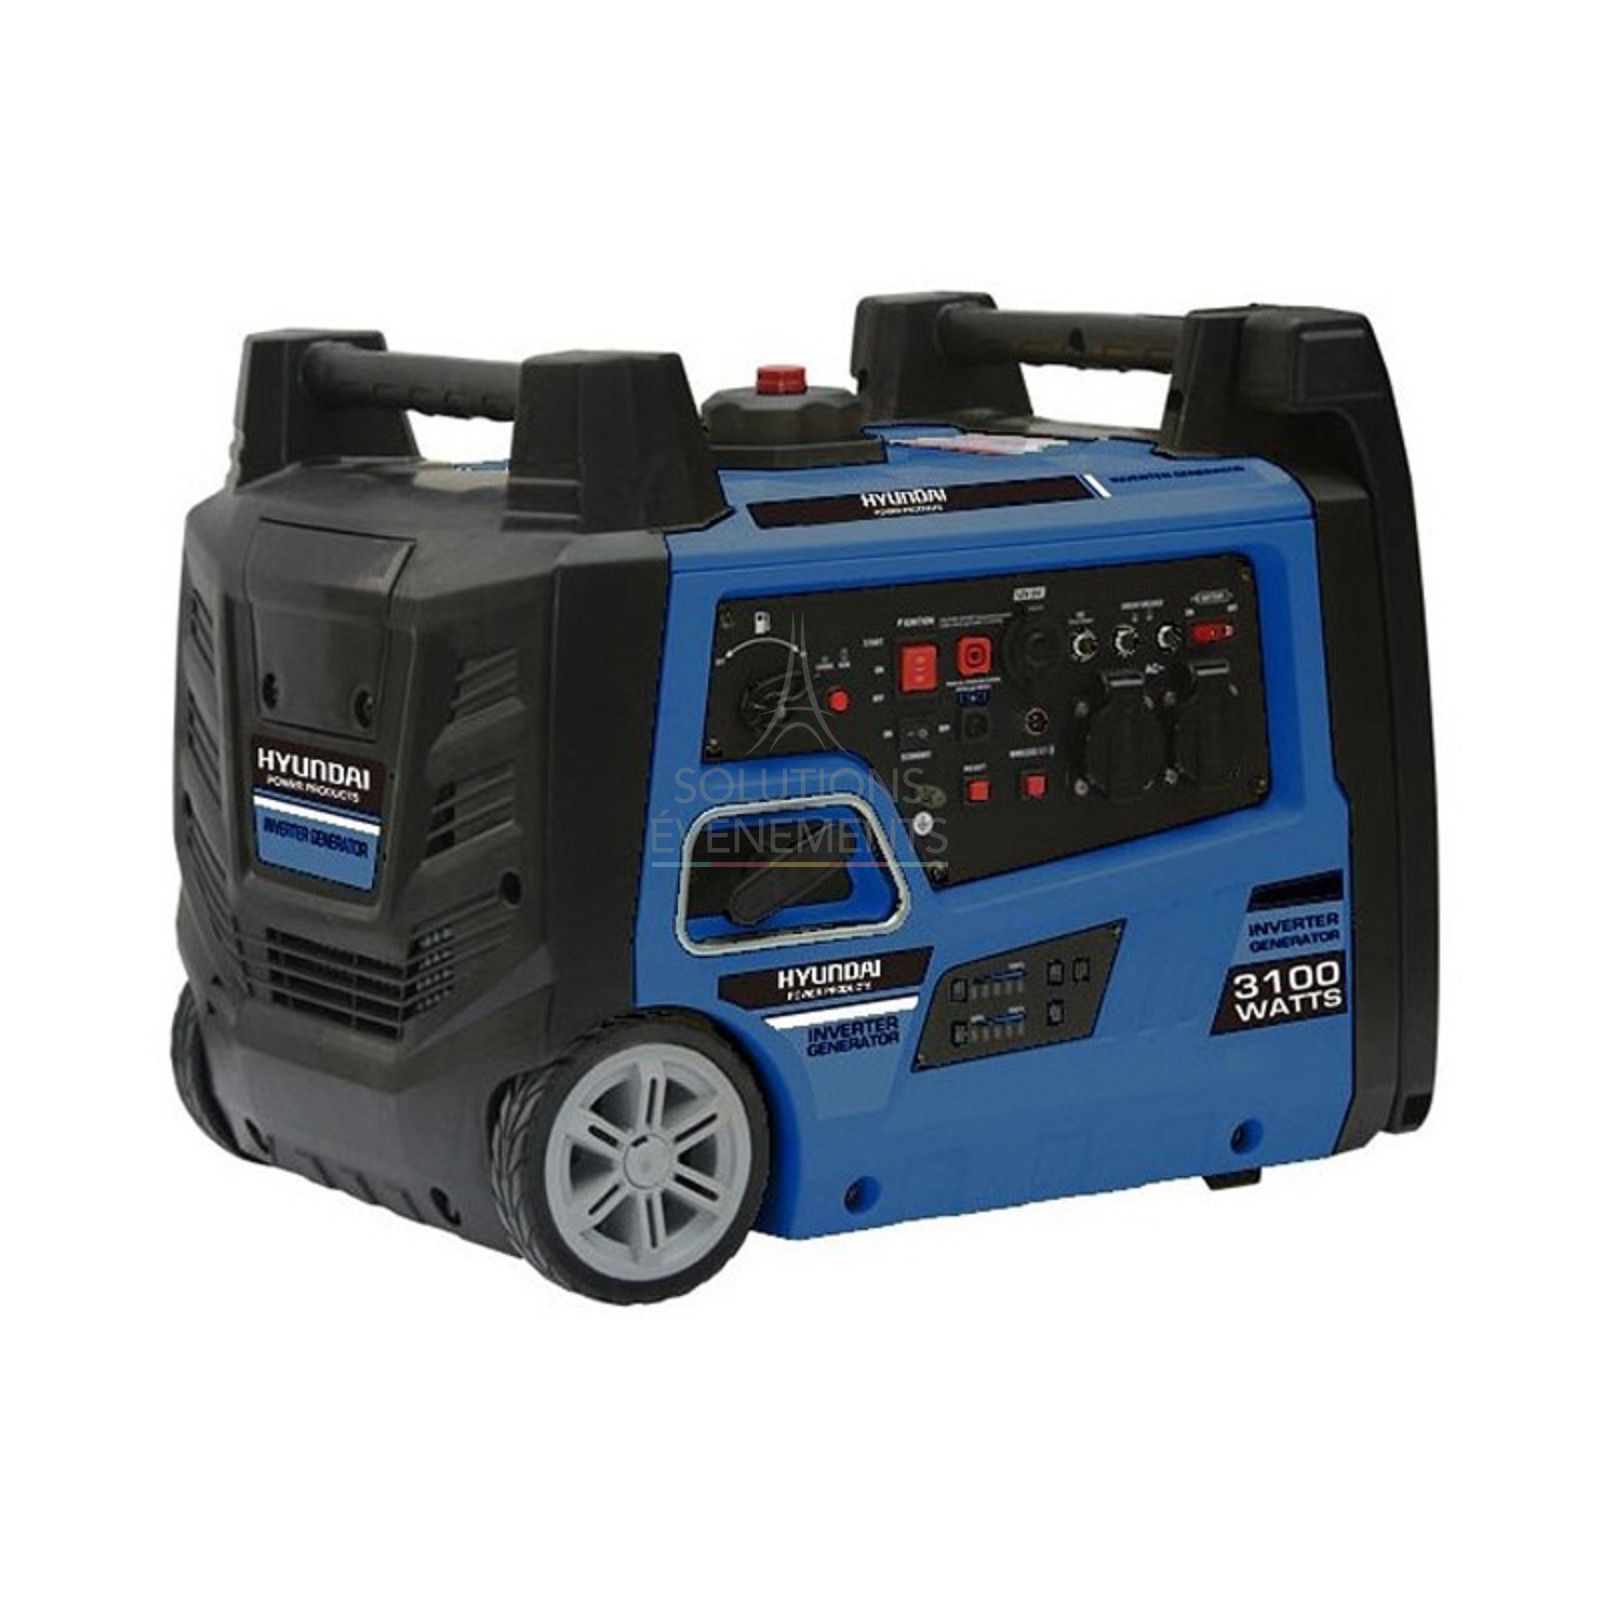 Rental of small format and high power generators